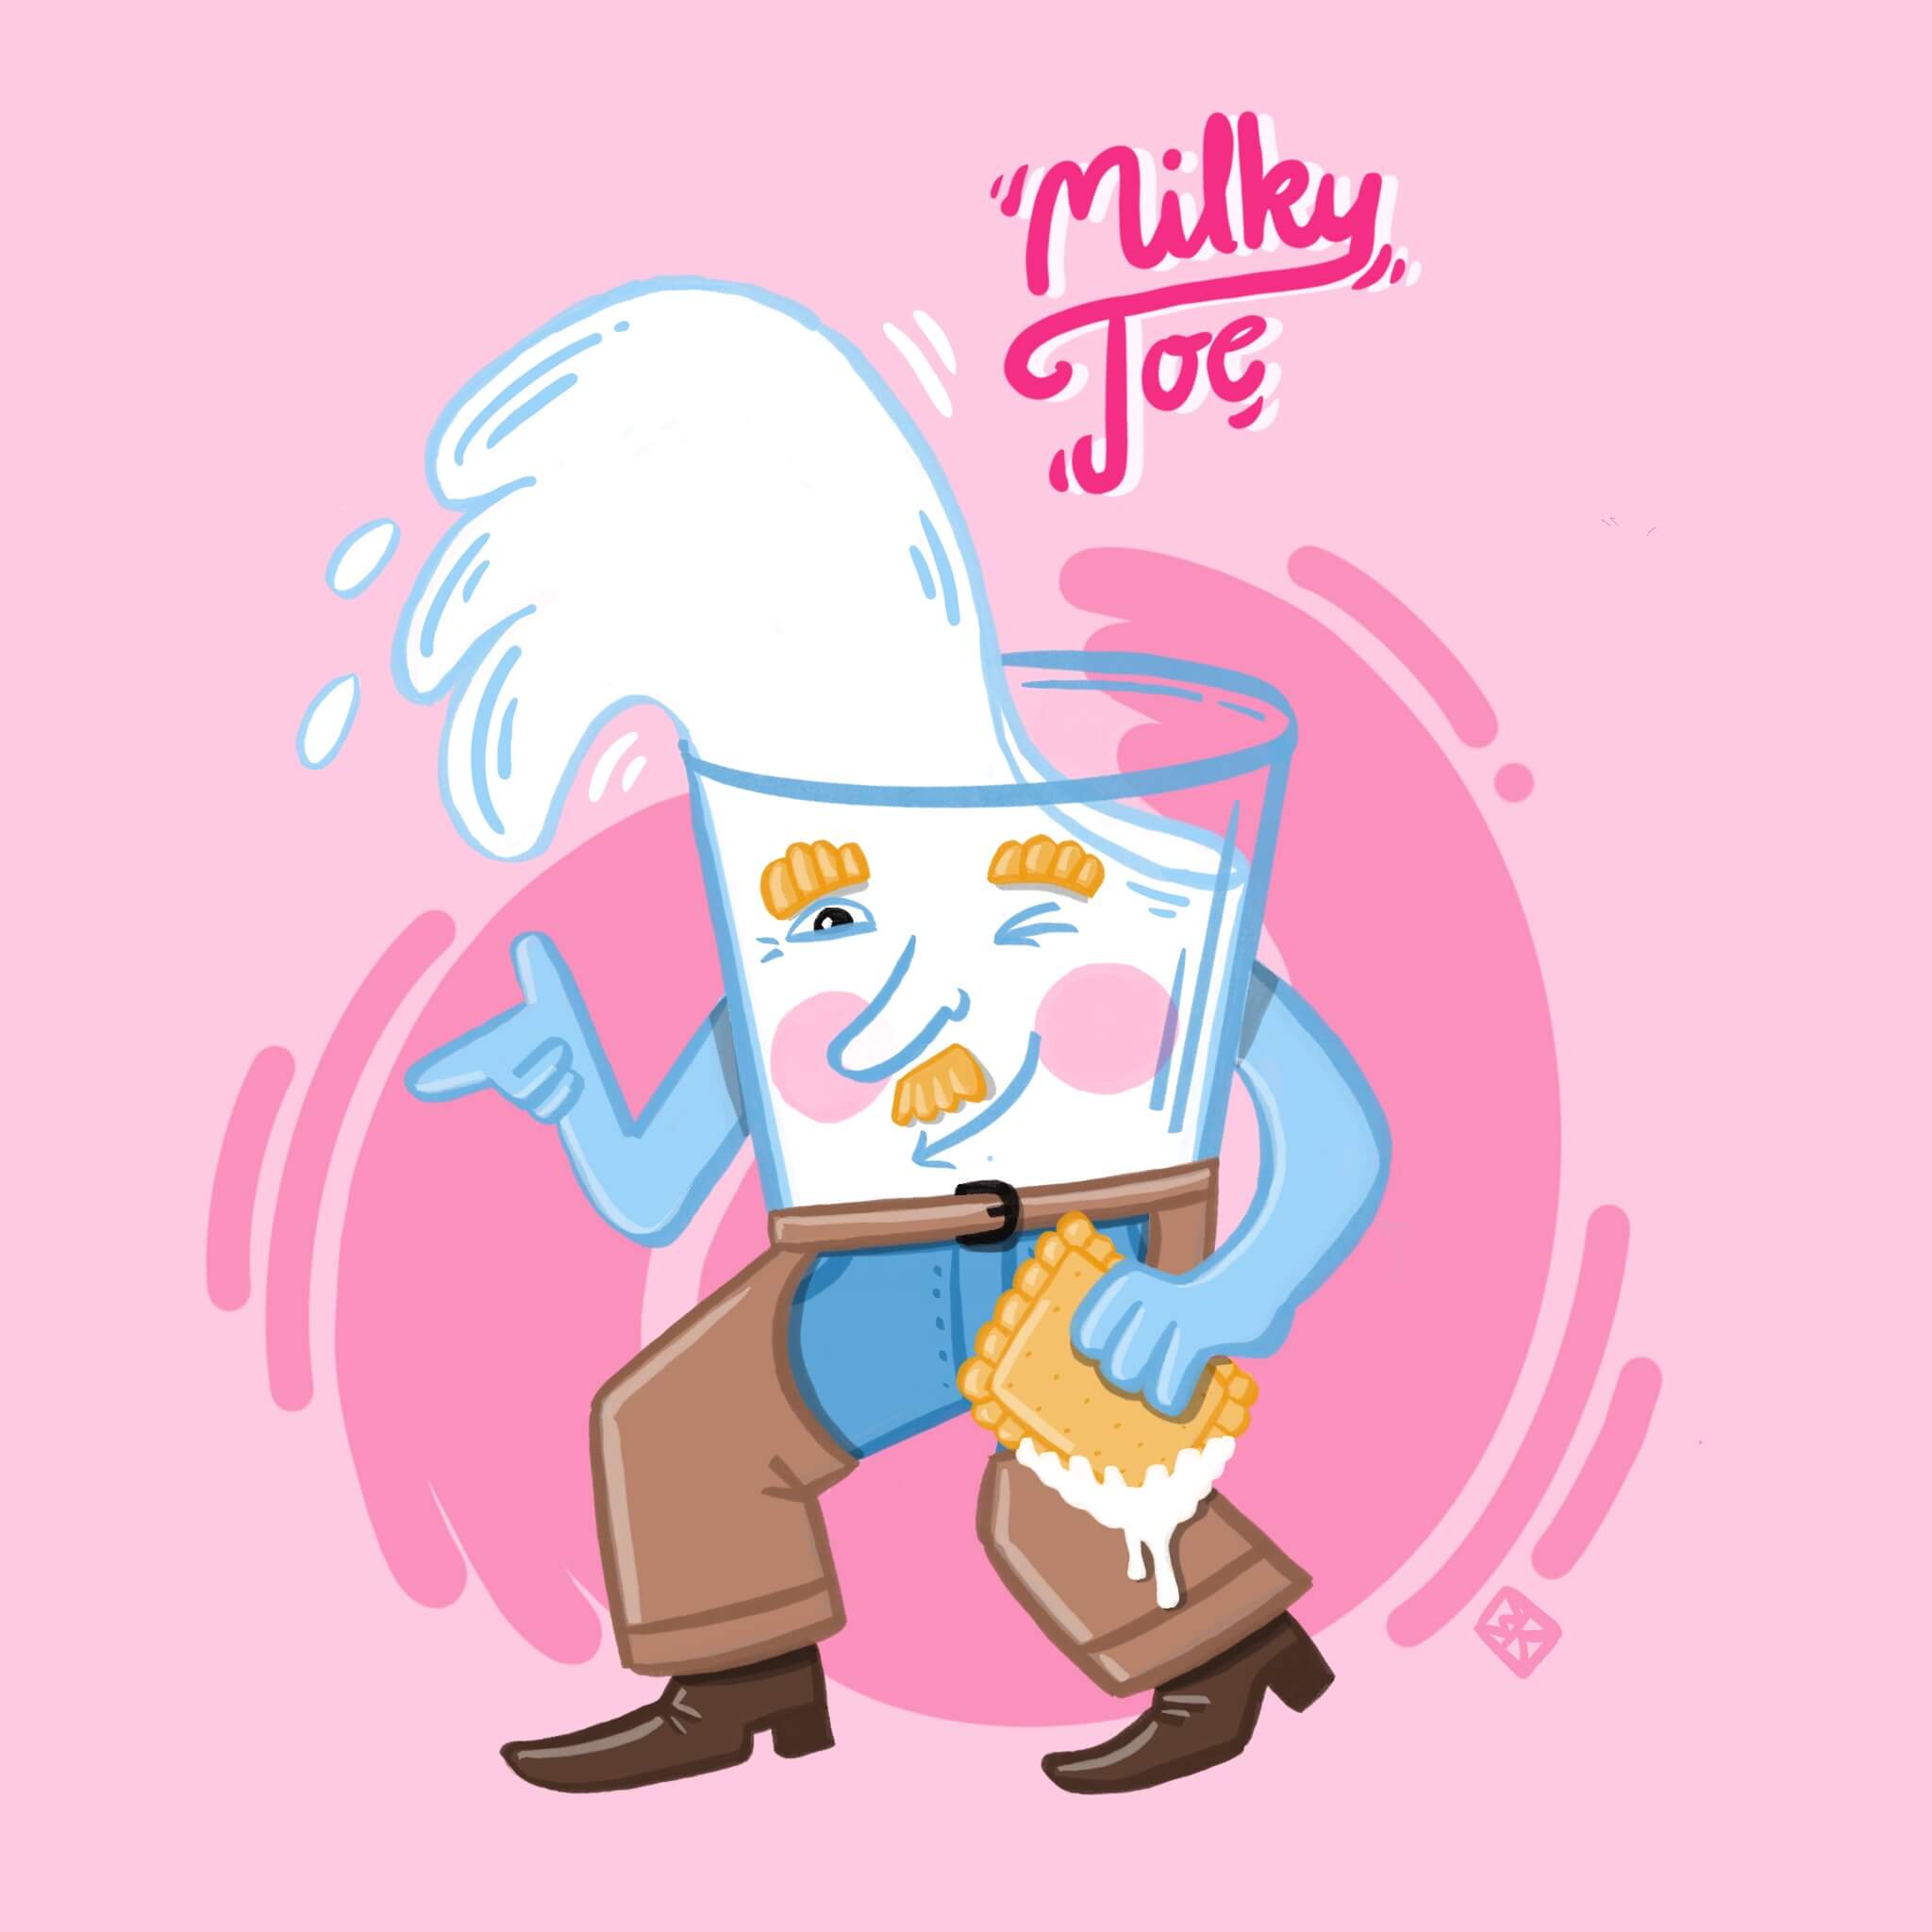 a milk glass character with a cookie in his hand